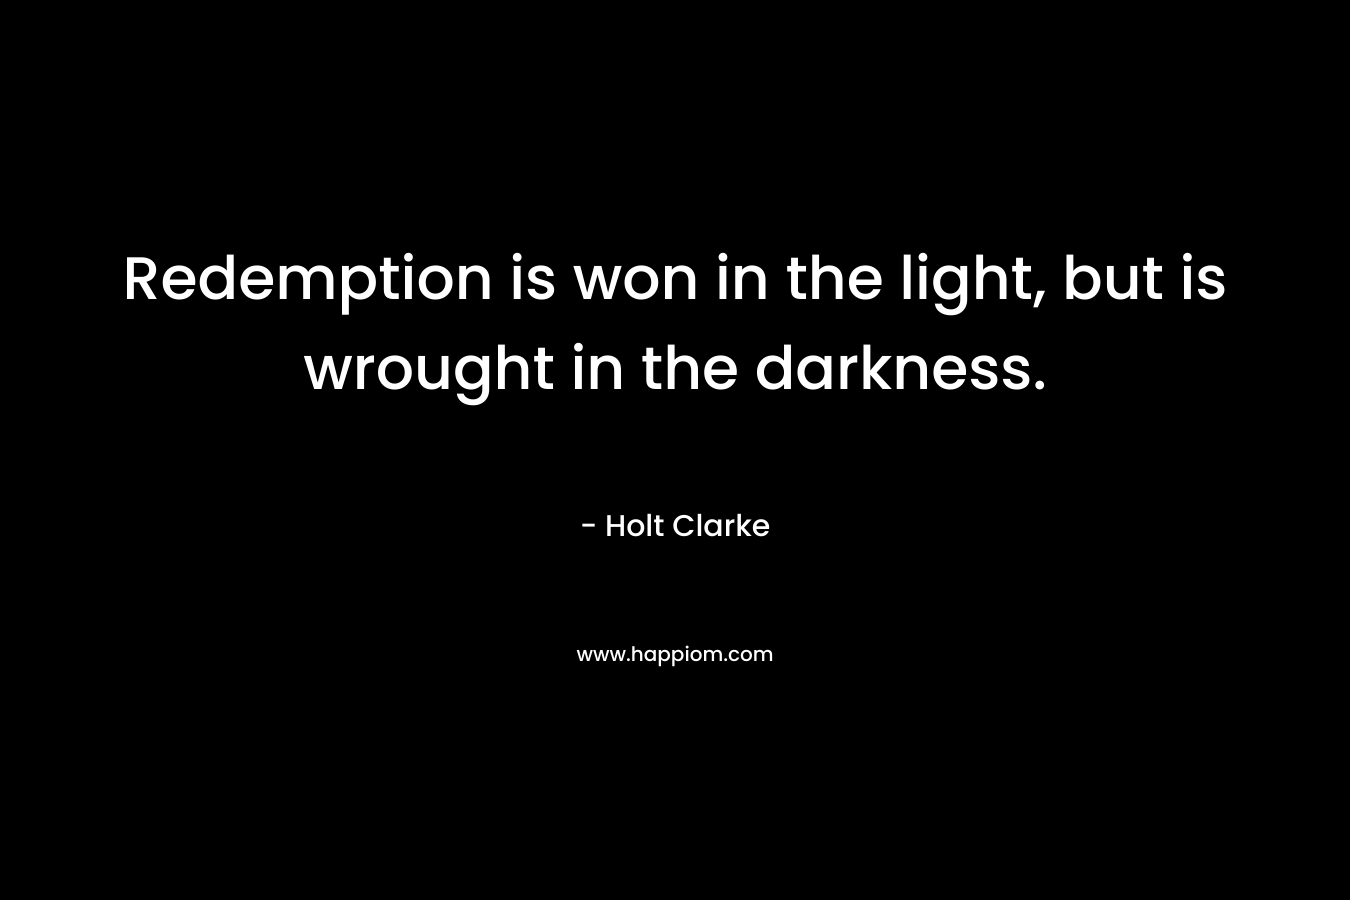 Redemption is won in the light, but is wrought in the darkness. – Holt Clarke